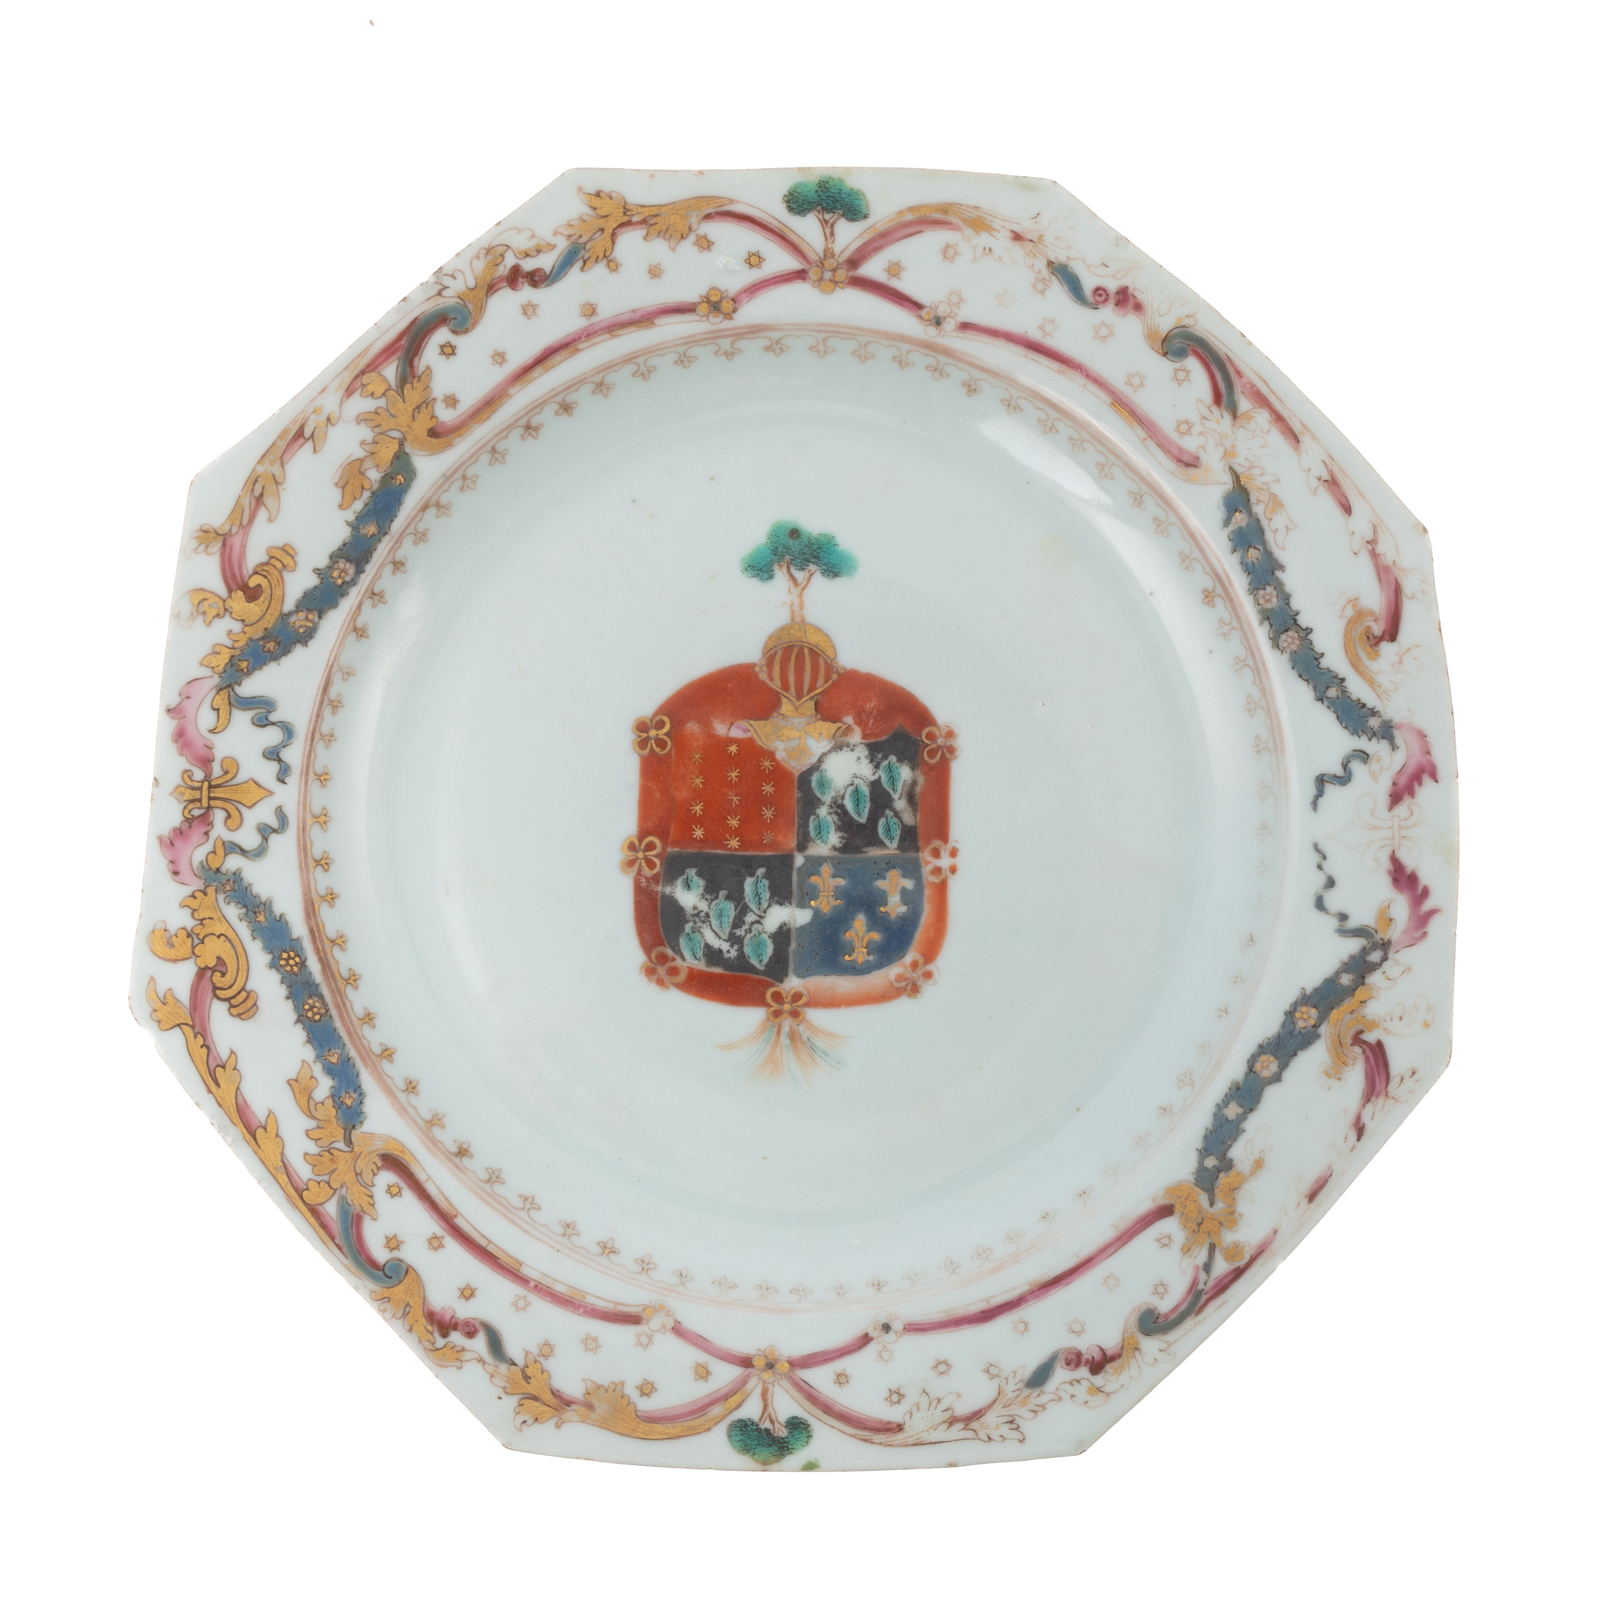 CHINESE EXPORT ARMORIAL PLATE Qianlong